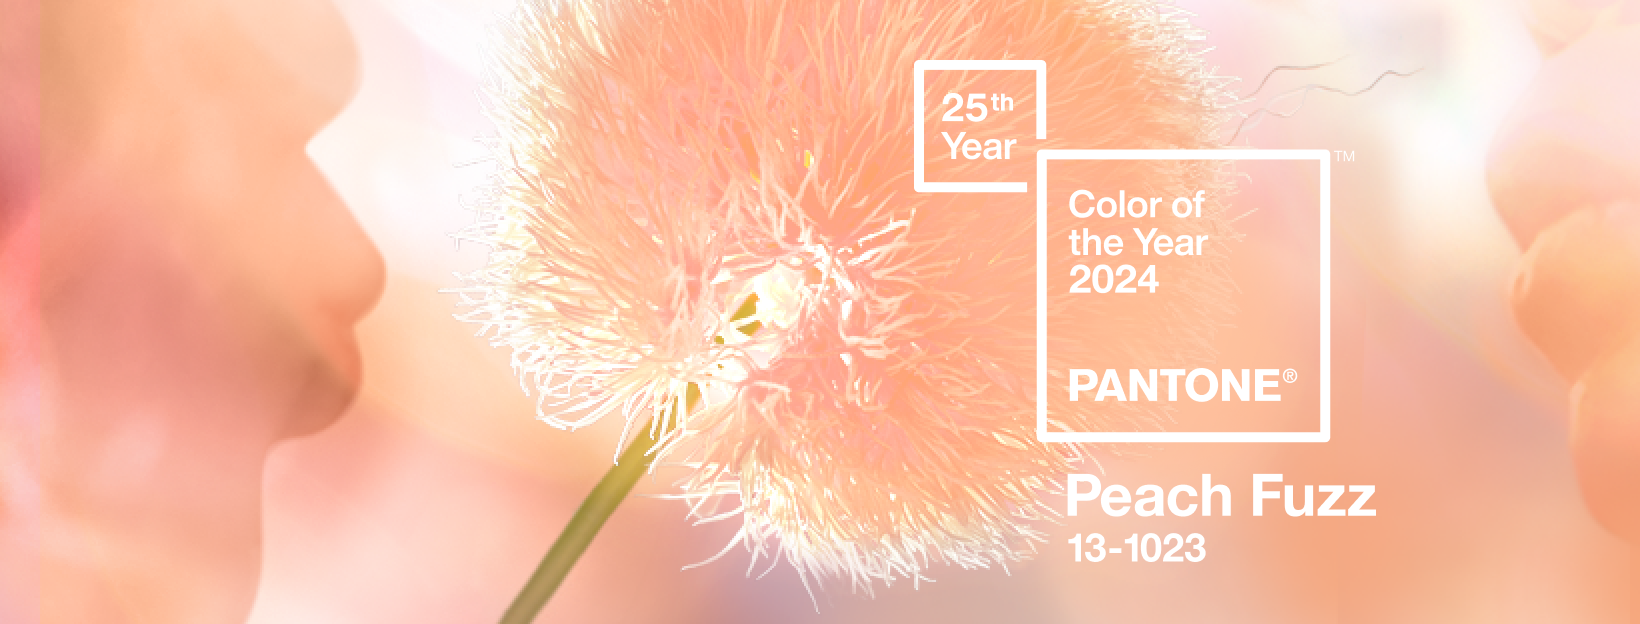 pantone-color-of-the-year-2024-peach-fuzz.png